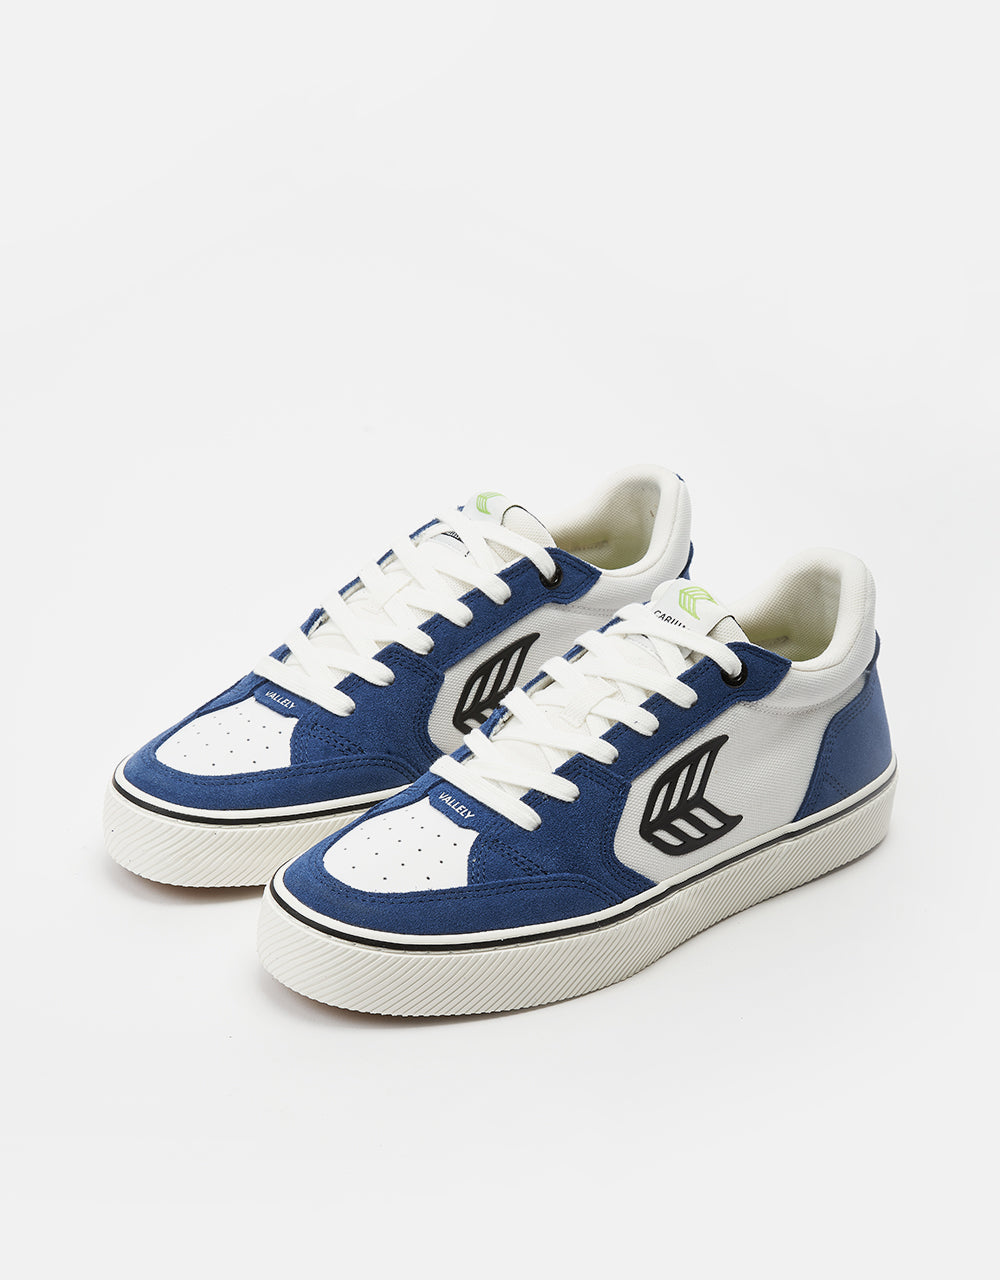 Cariuma Vallely Pro Skate Shoes - Off-White/Mystery Blue